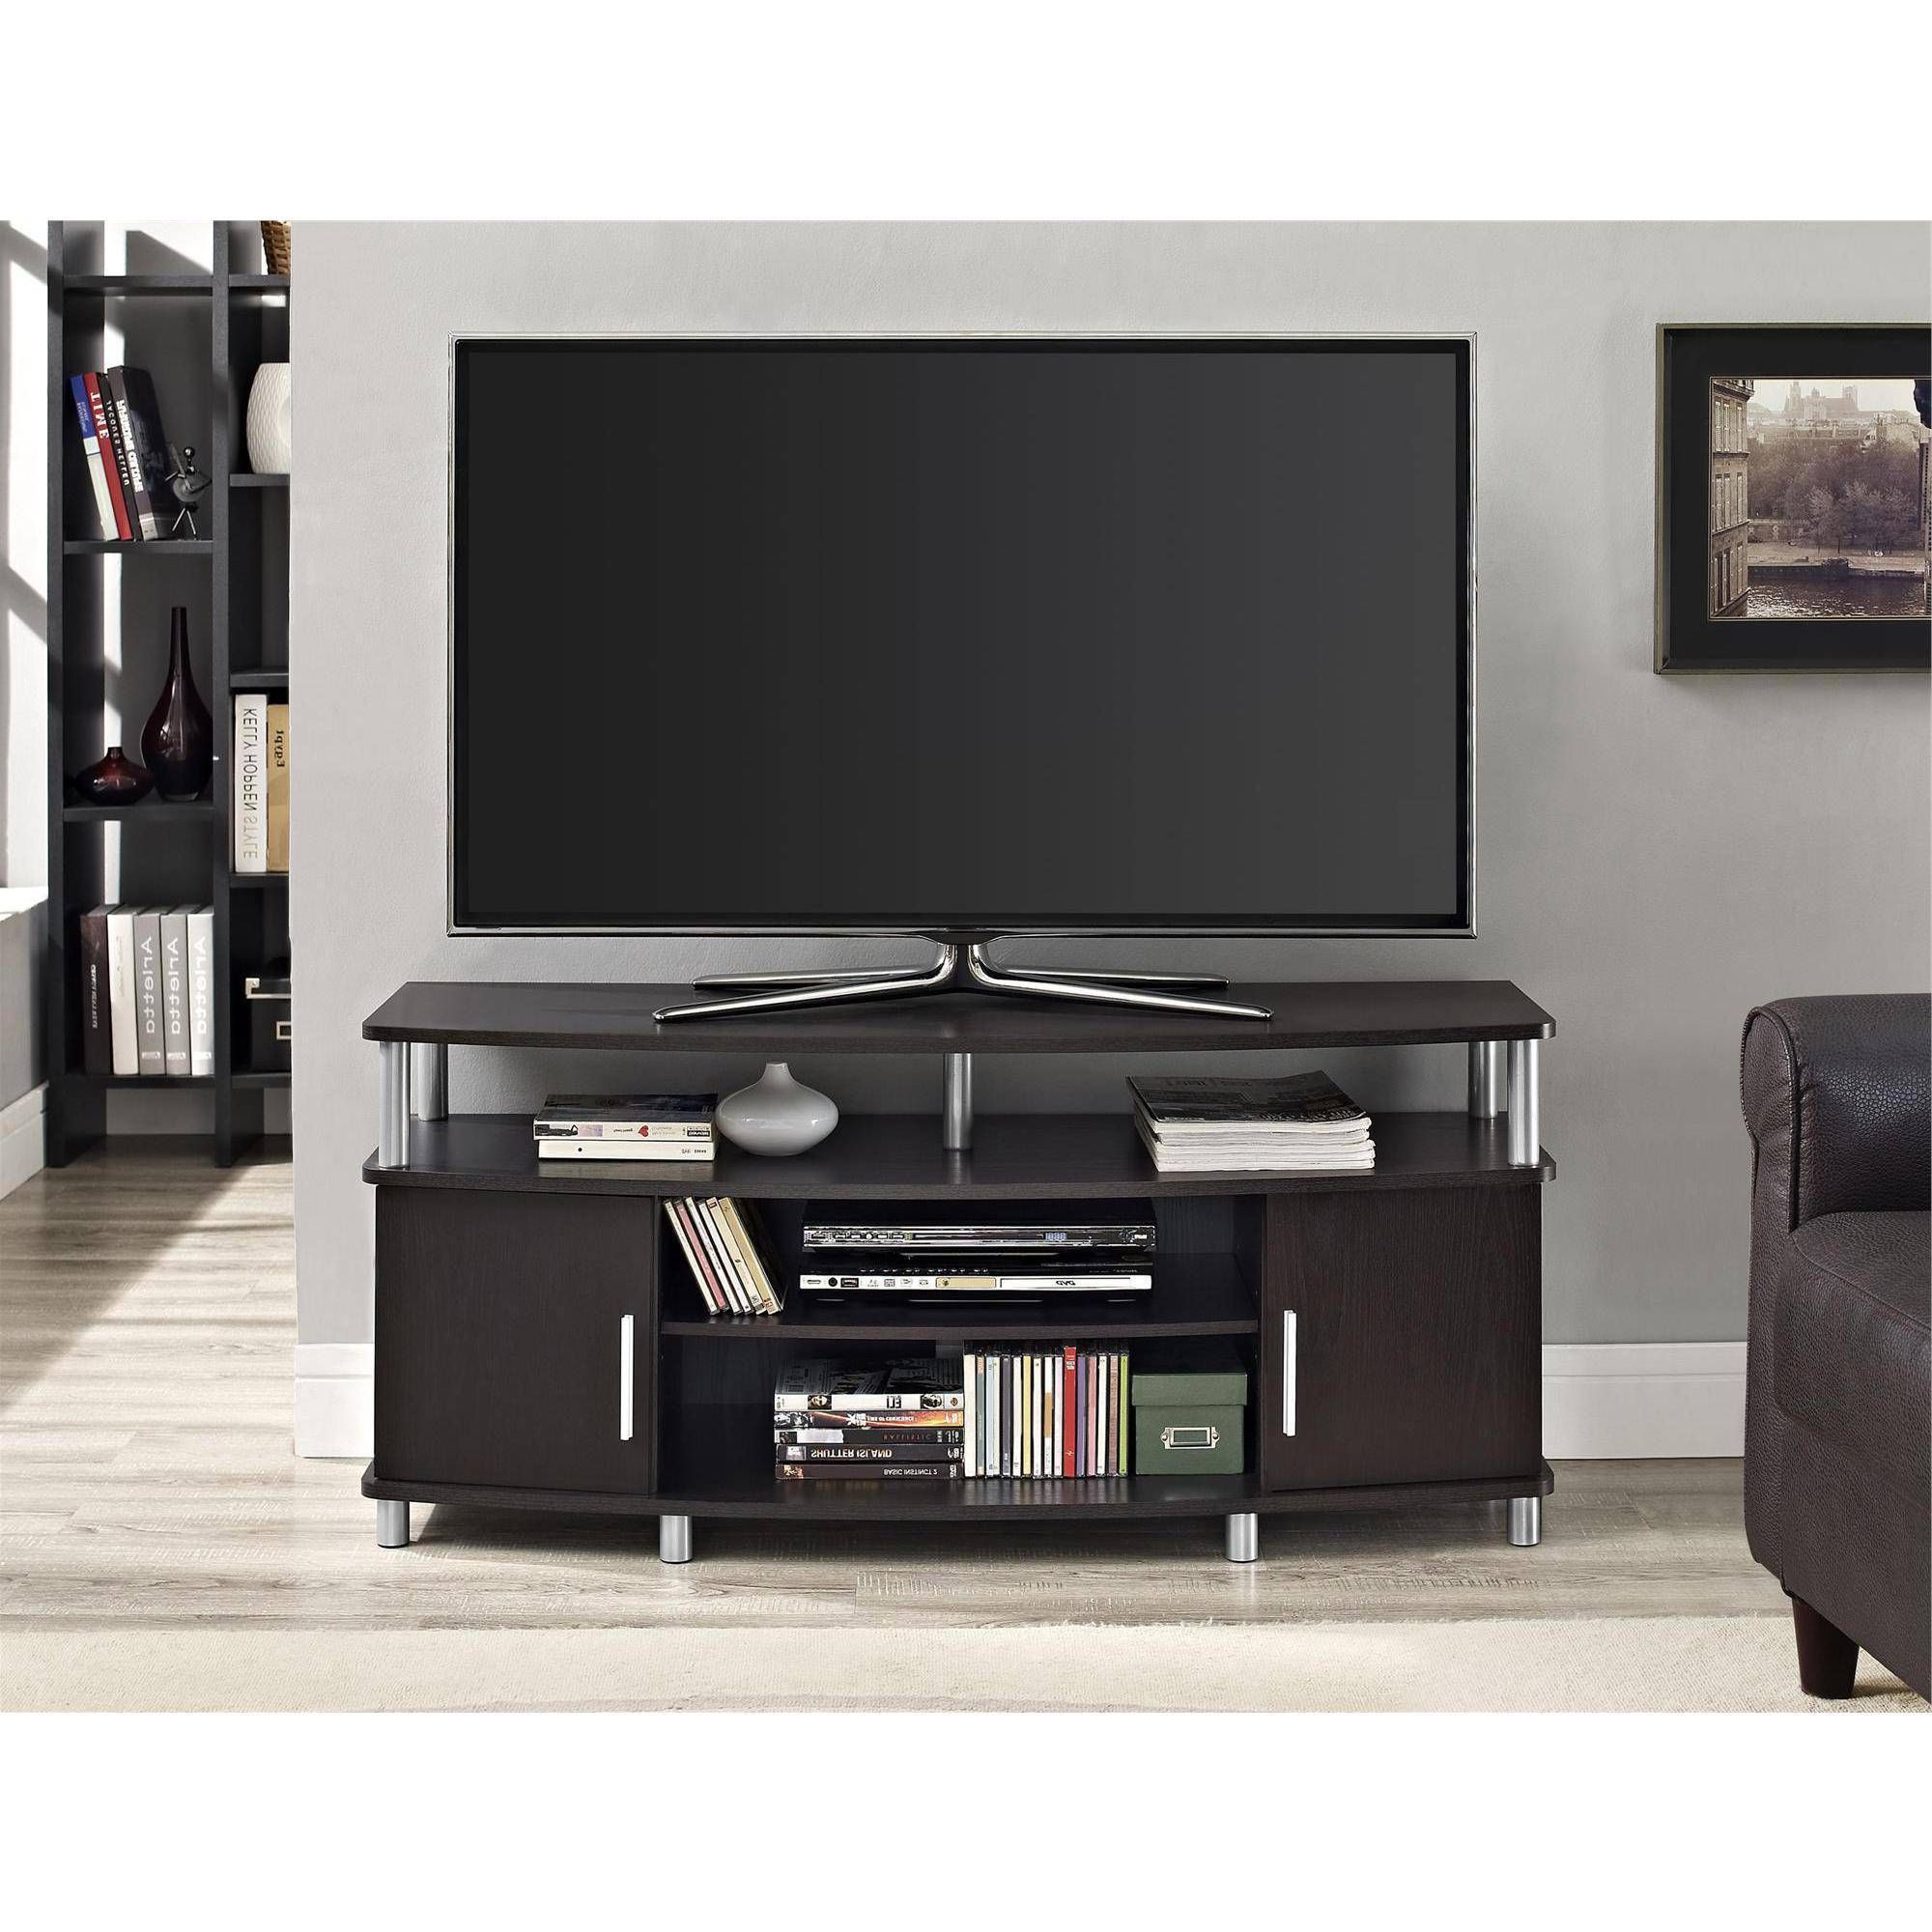 Most Popular Wooden Tv Stands For 50 Inch Tv Within Tv Stand 50" Entertainment Center Modern Media Furniture Console (View 13 of 20)